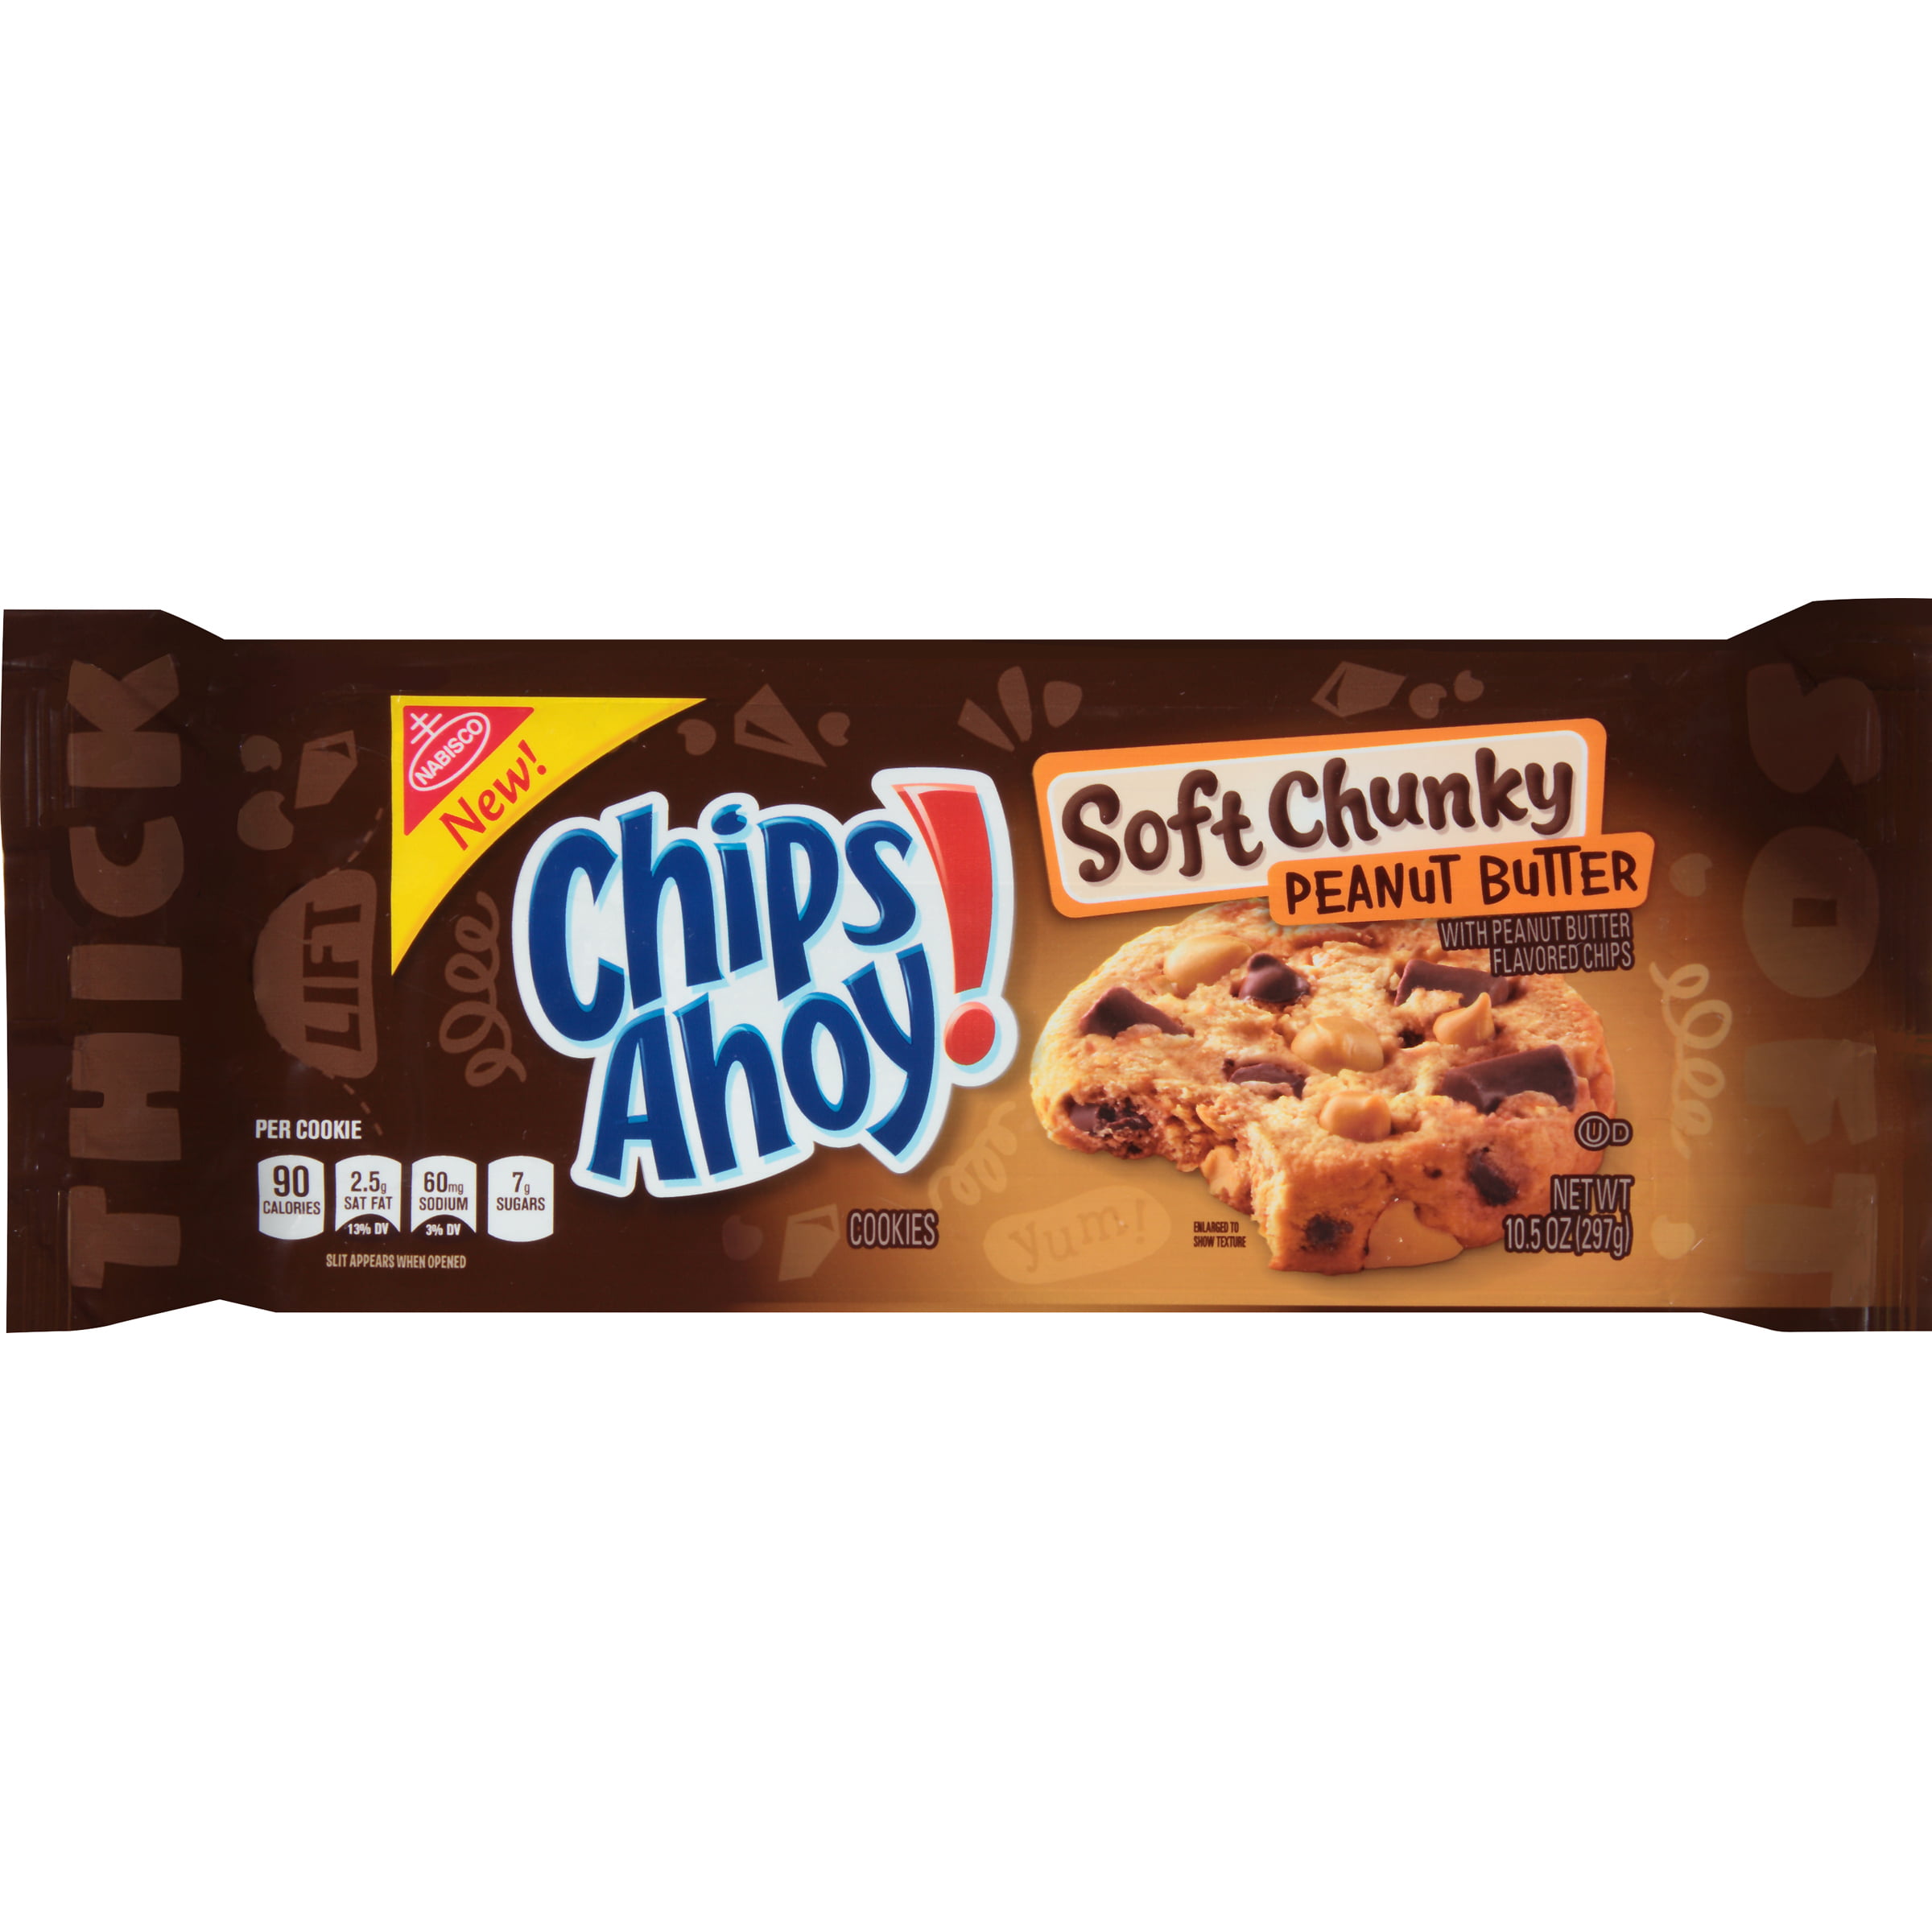 Nabisco Chips Ahoy! Soft Chunky Peanut Butter Cookies, 10.5 Oz